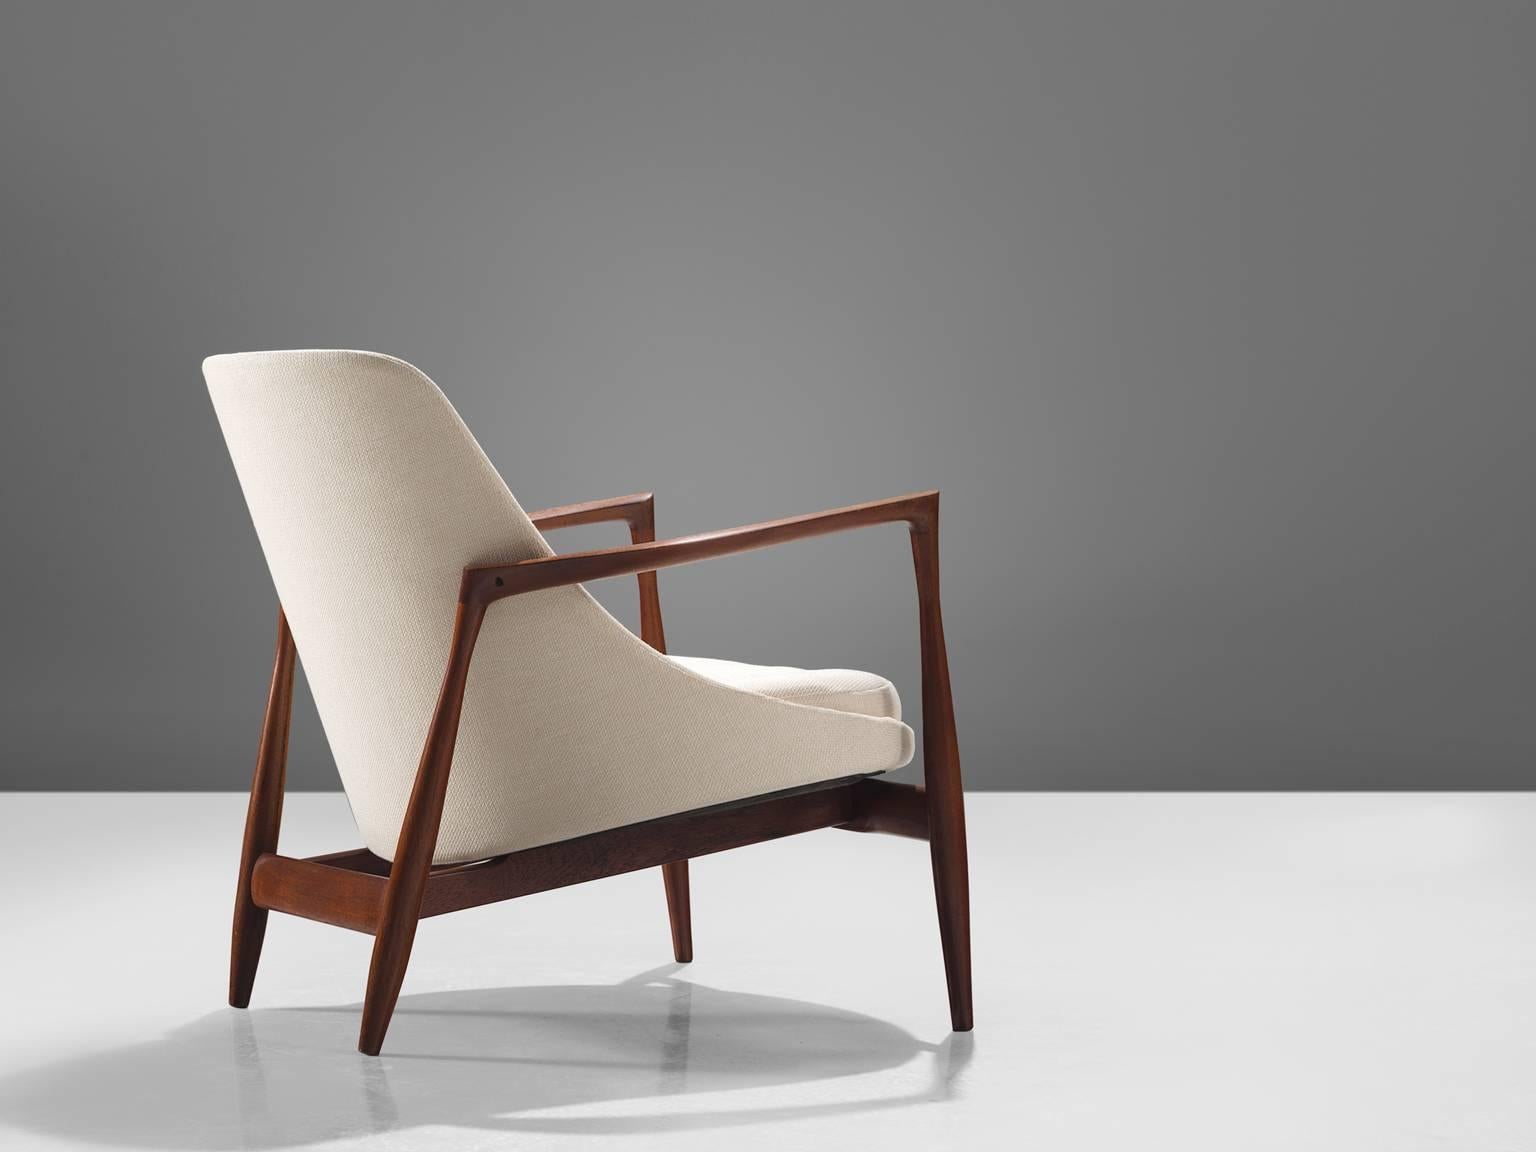 Ib Kofod-Larsen, model U-56 'Elizabeth', teak and white fabric, Denmark, 1956. 

This is Kofod-Larsen's highest-quality armchair. This version is executed with a teak frame and beautiful refined details in the design. This classic chair is one of